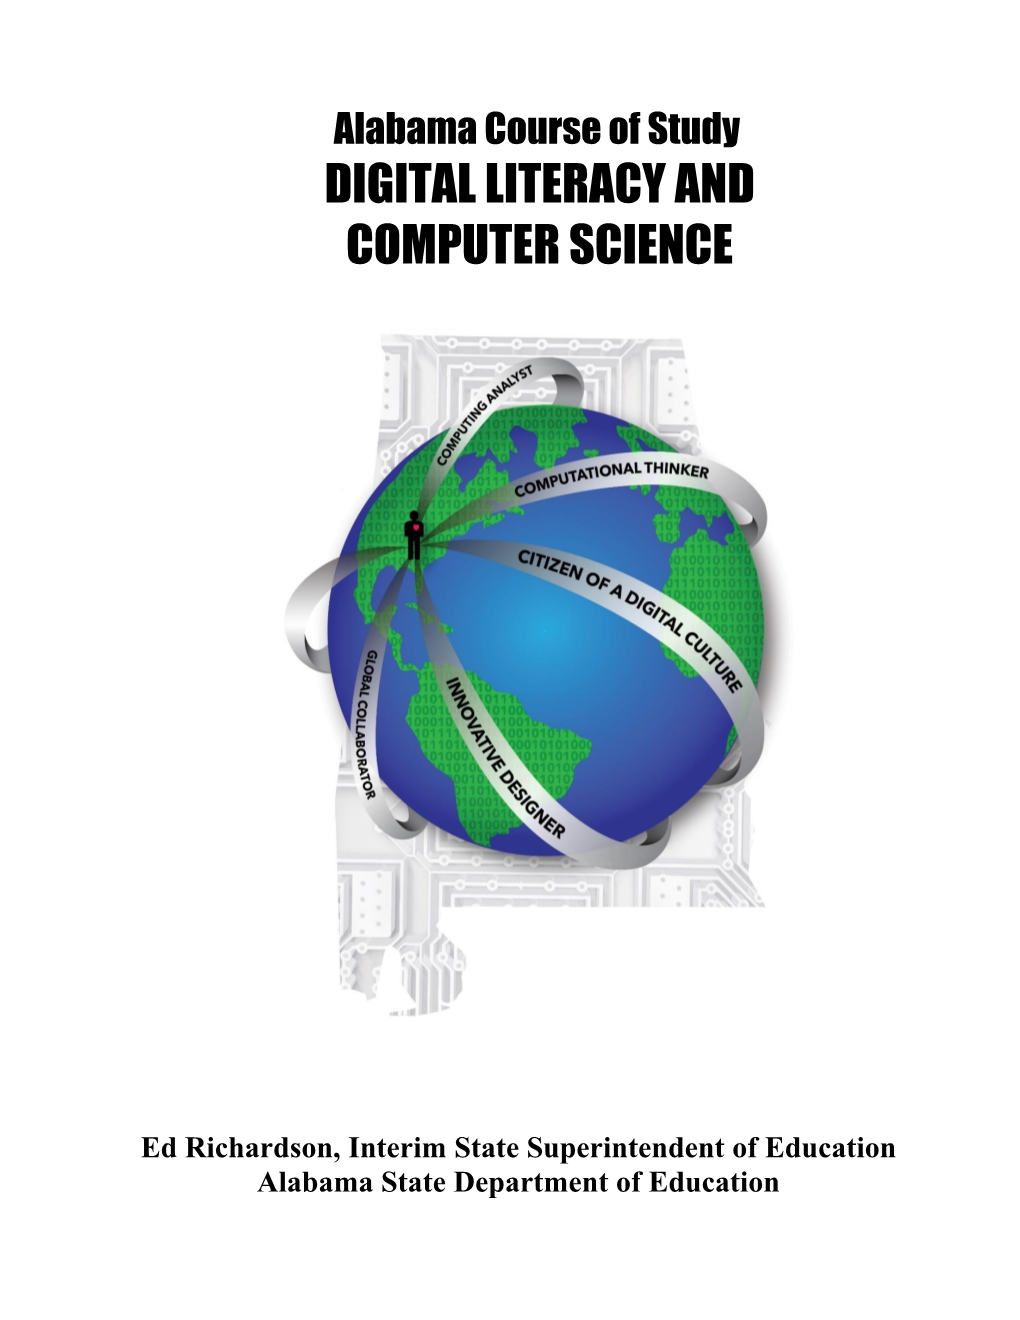 Alabama Course of Study DIGITAL LITERACY and COMPUTER SCIENCE